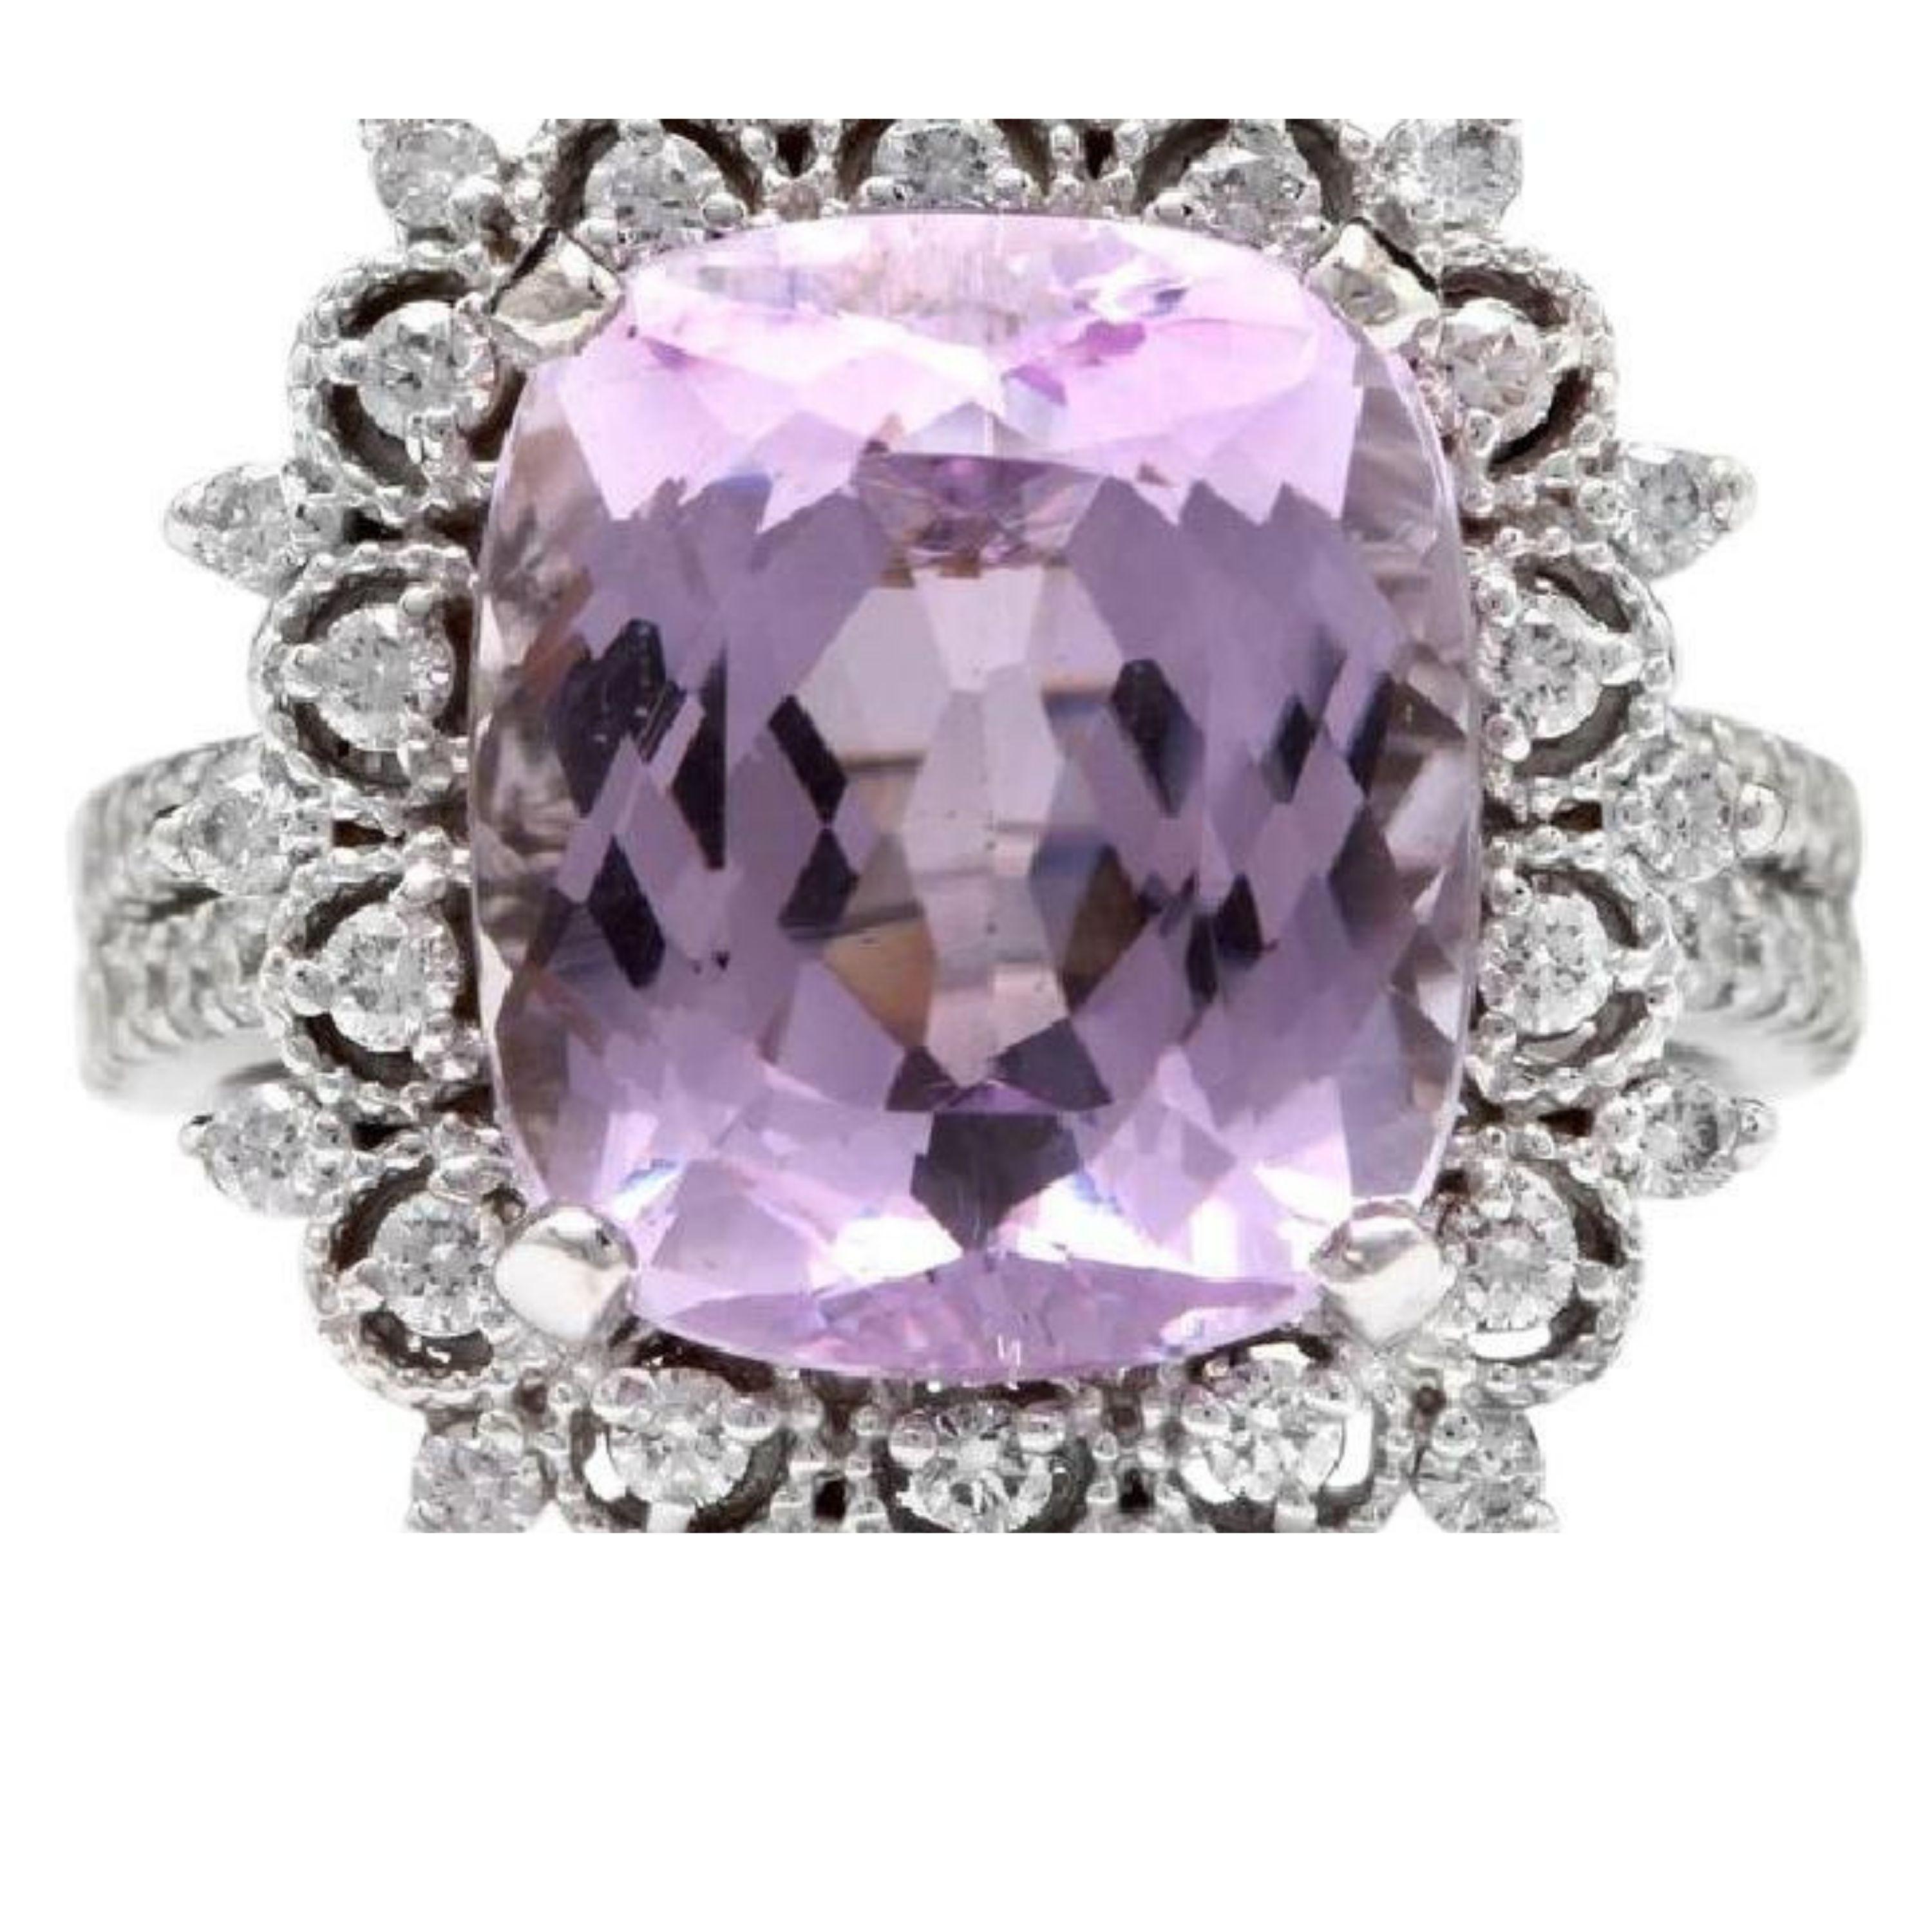 7.00 Carats Natural Kunzite and Diamond 14K Solid White Gold Ring

Total Natural Cushion Cut Kunzite Weights: 6.00 Carats

Kunzite Measures: 12.55 10.75mm

Natural Round Diamonds Weight: 1.00 Carats (color G / Clarity VS2-SI1)

Ring size: 7 (we